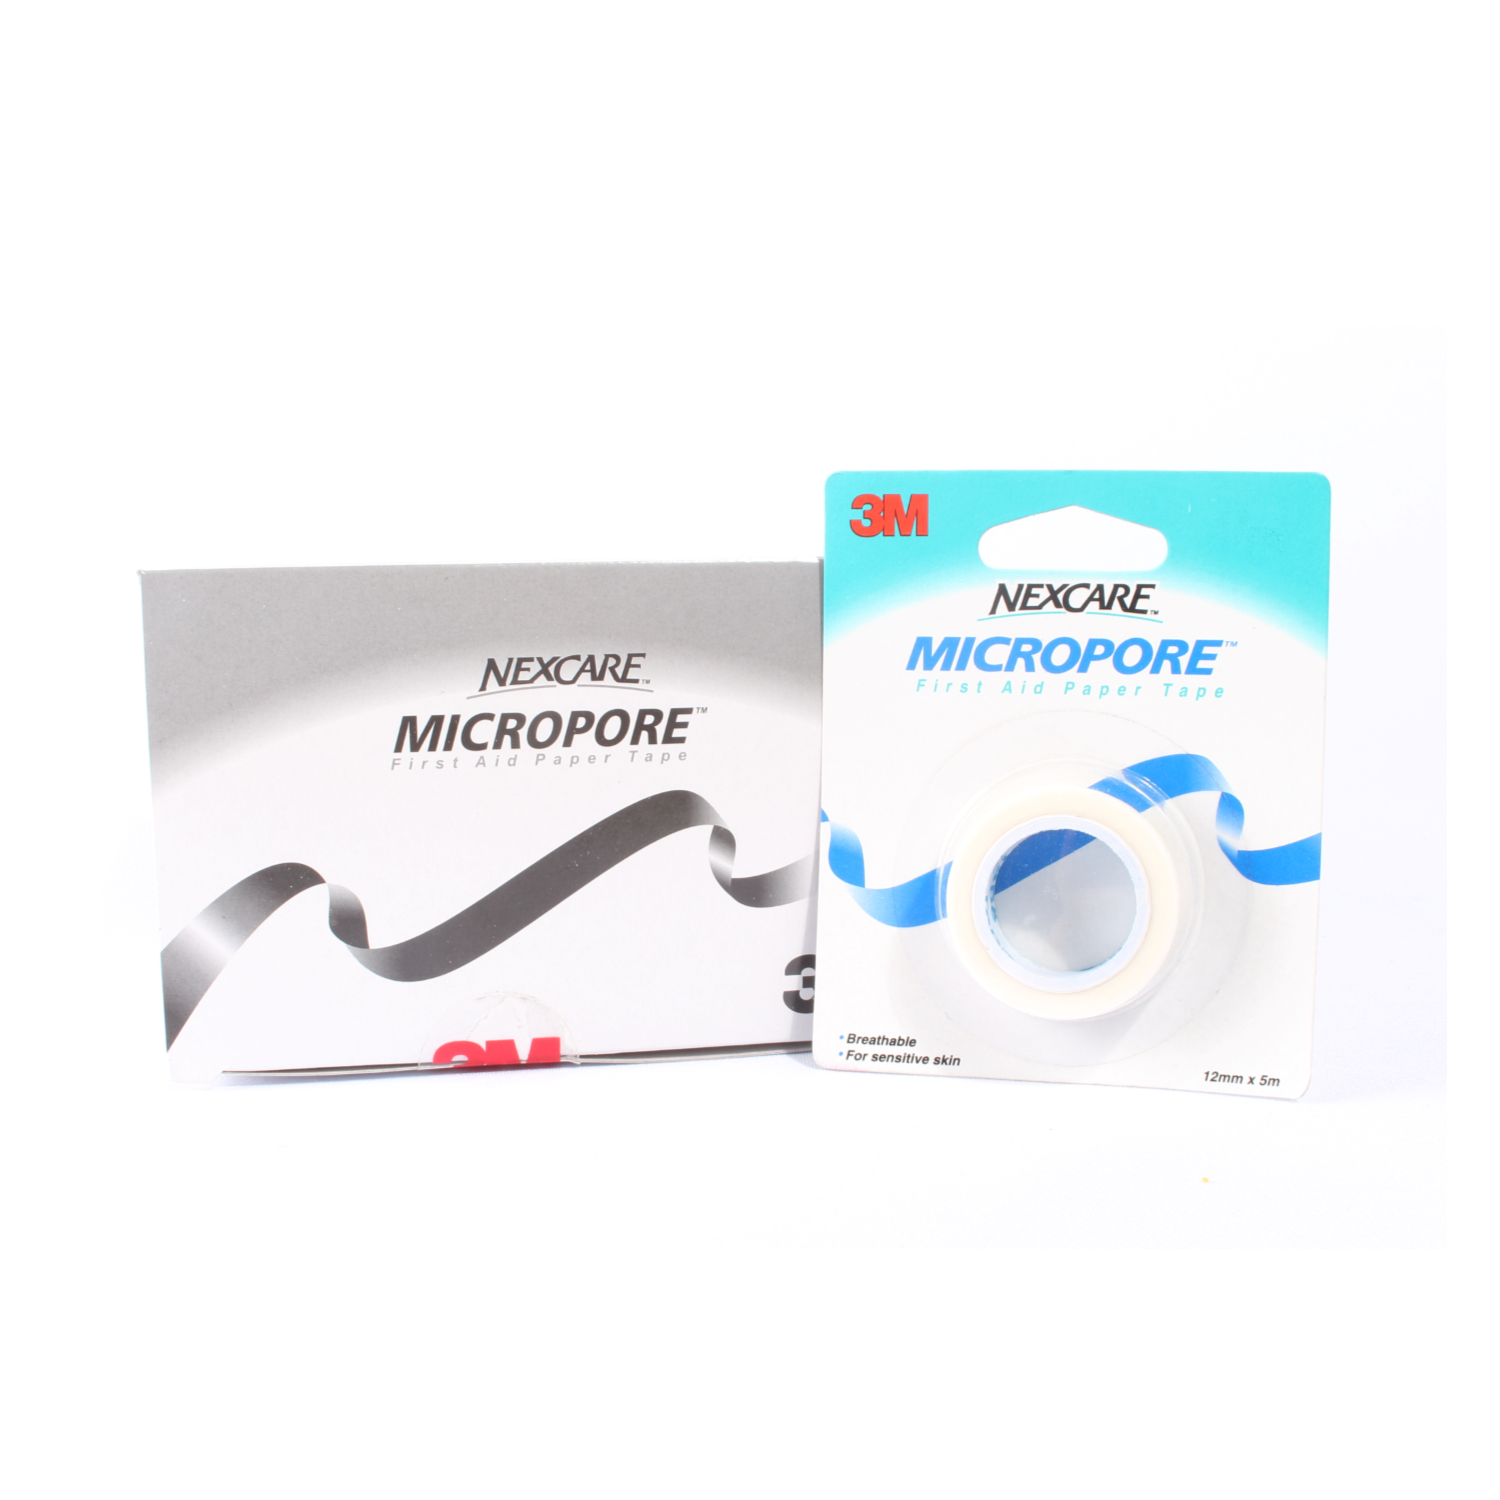 3M Nexcare Micropore - Microporous medical tape.